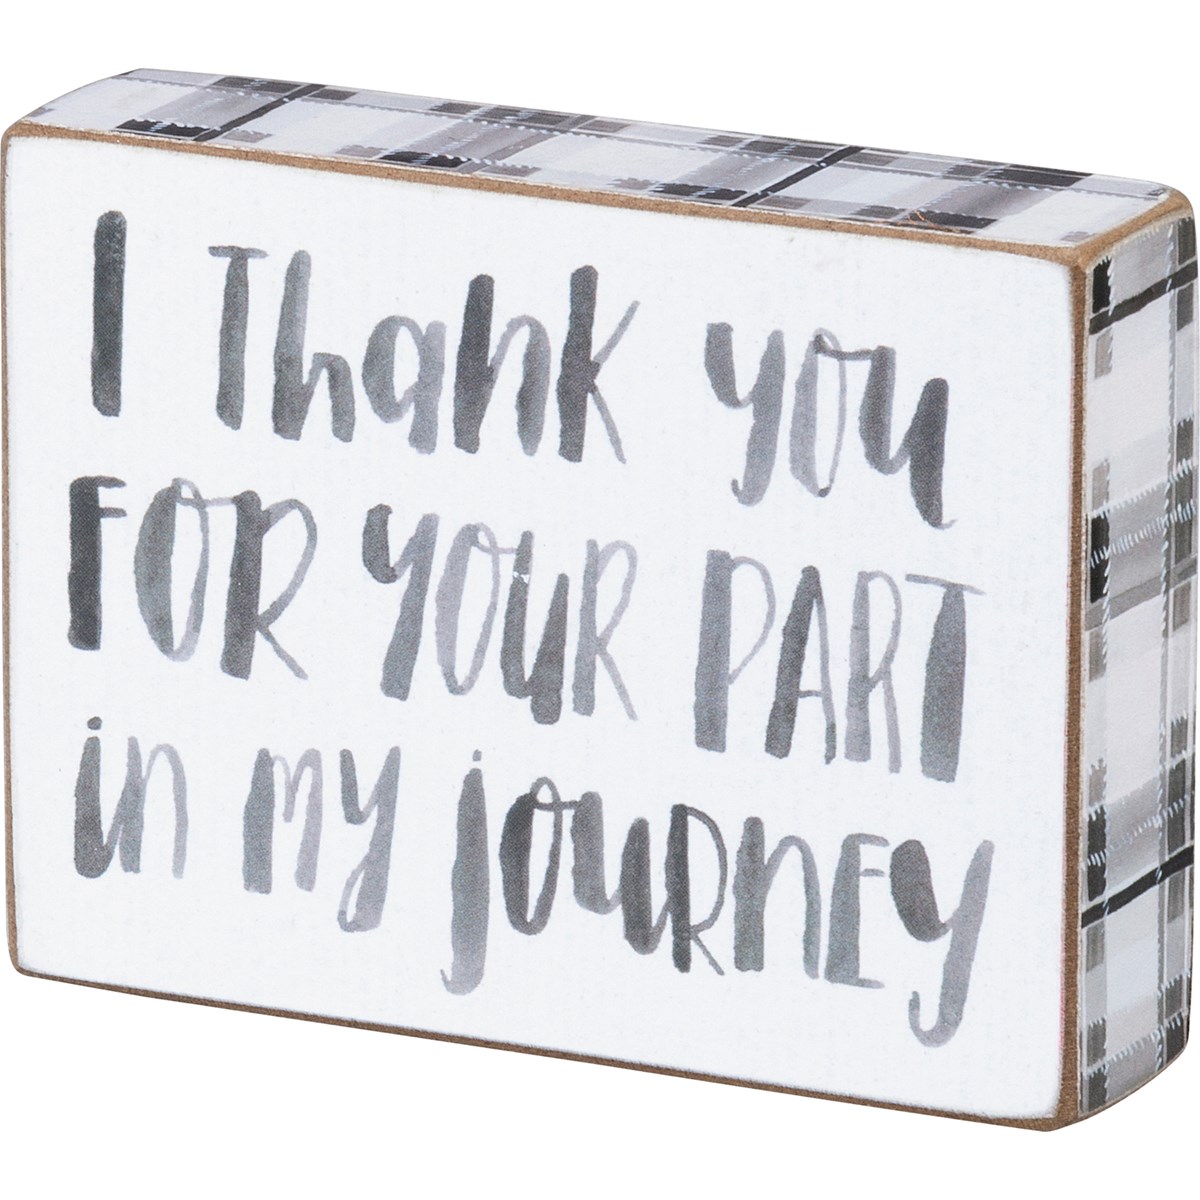 Block Sign - Thank You For Your Part In My Journey - 4" x 3" x 1" - Wood, Paper